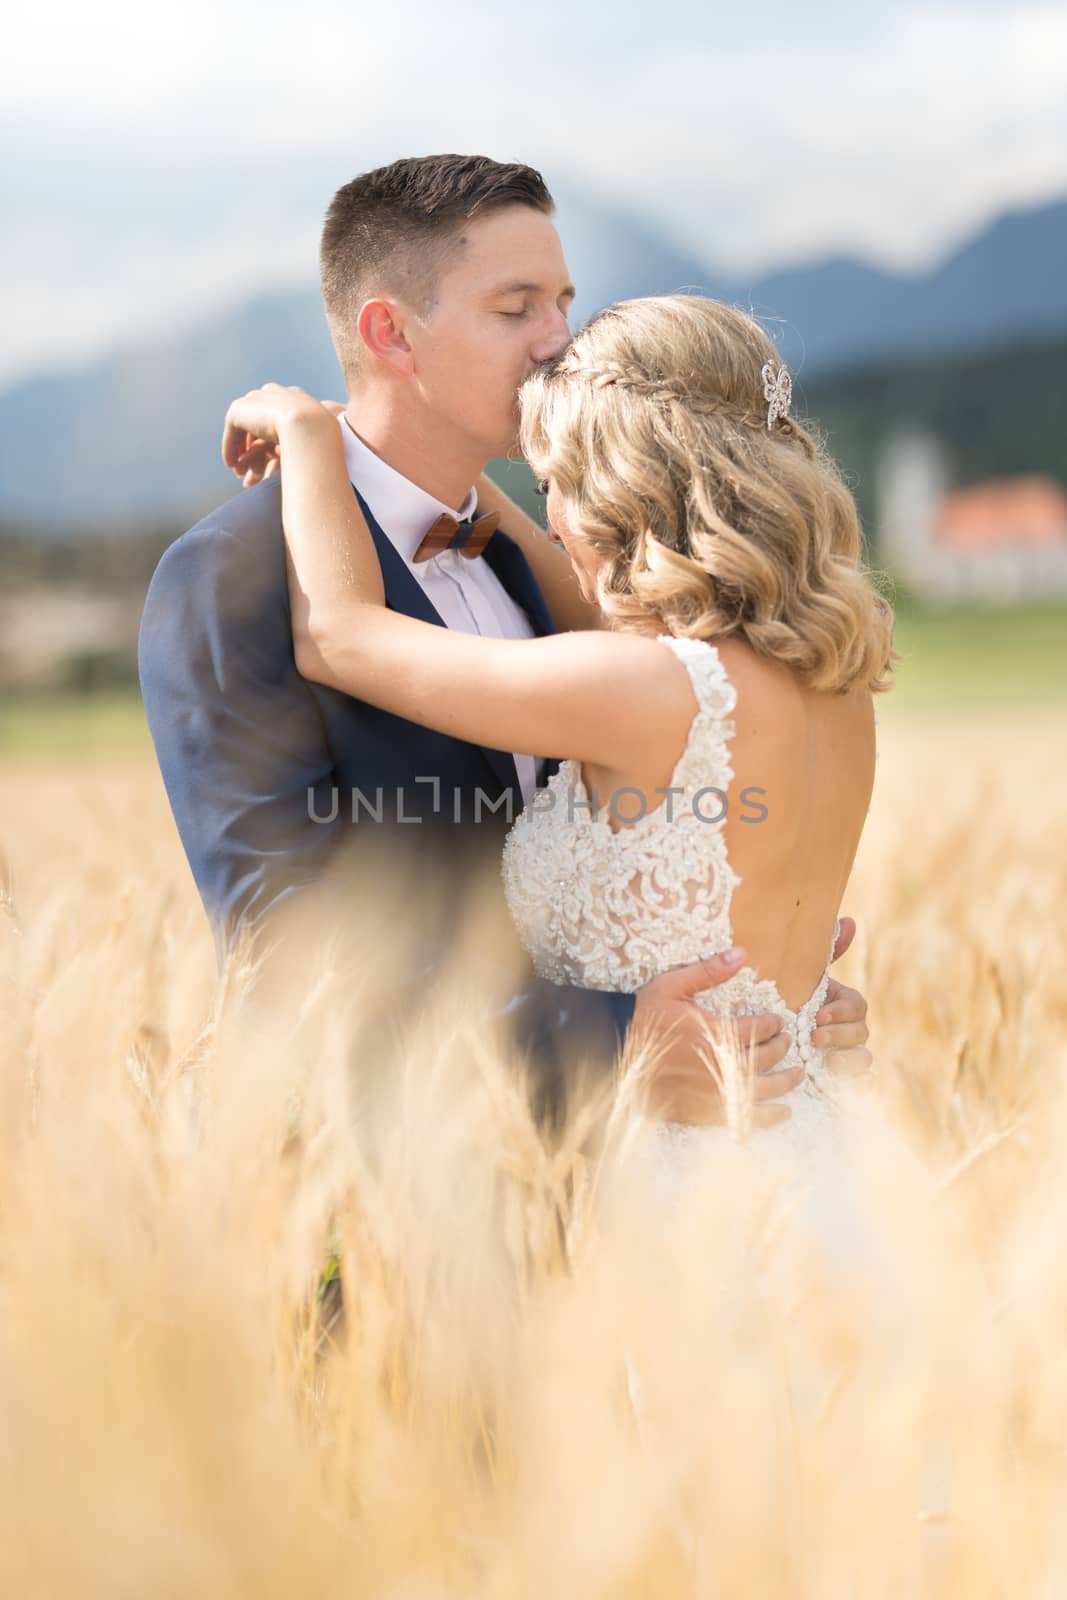 Groom hugging bride tenderly and kisses her on forehead in wheat field somewhere in Slovenian countryside. by kasto